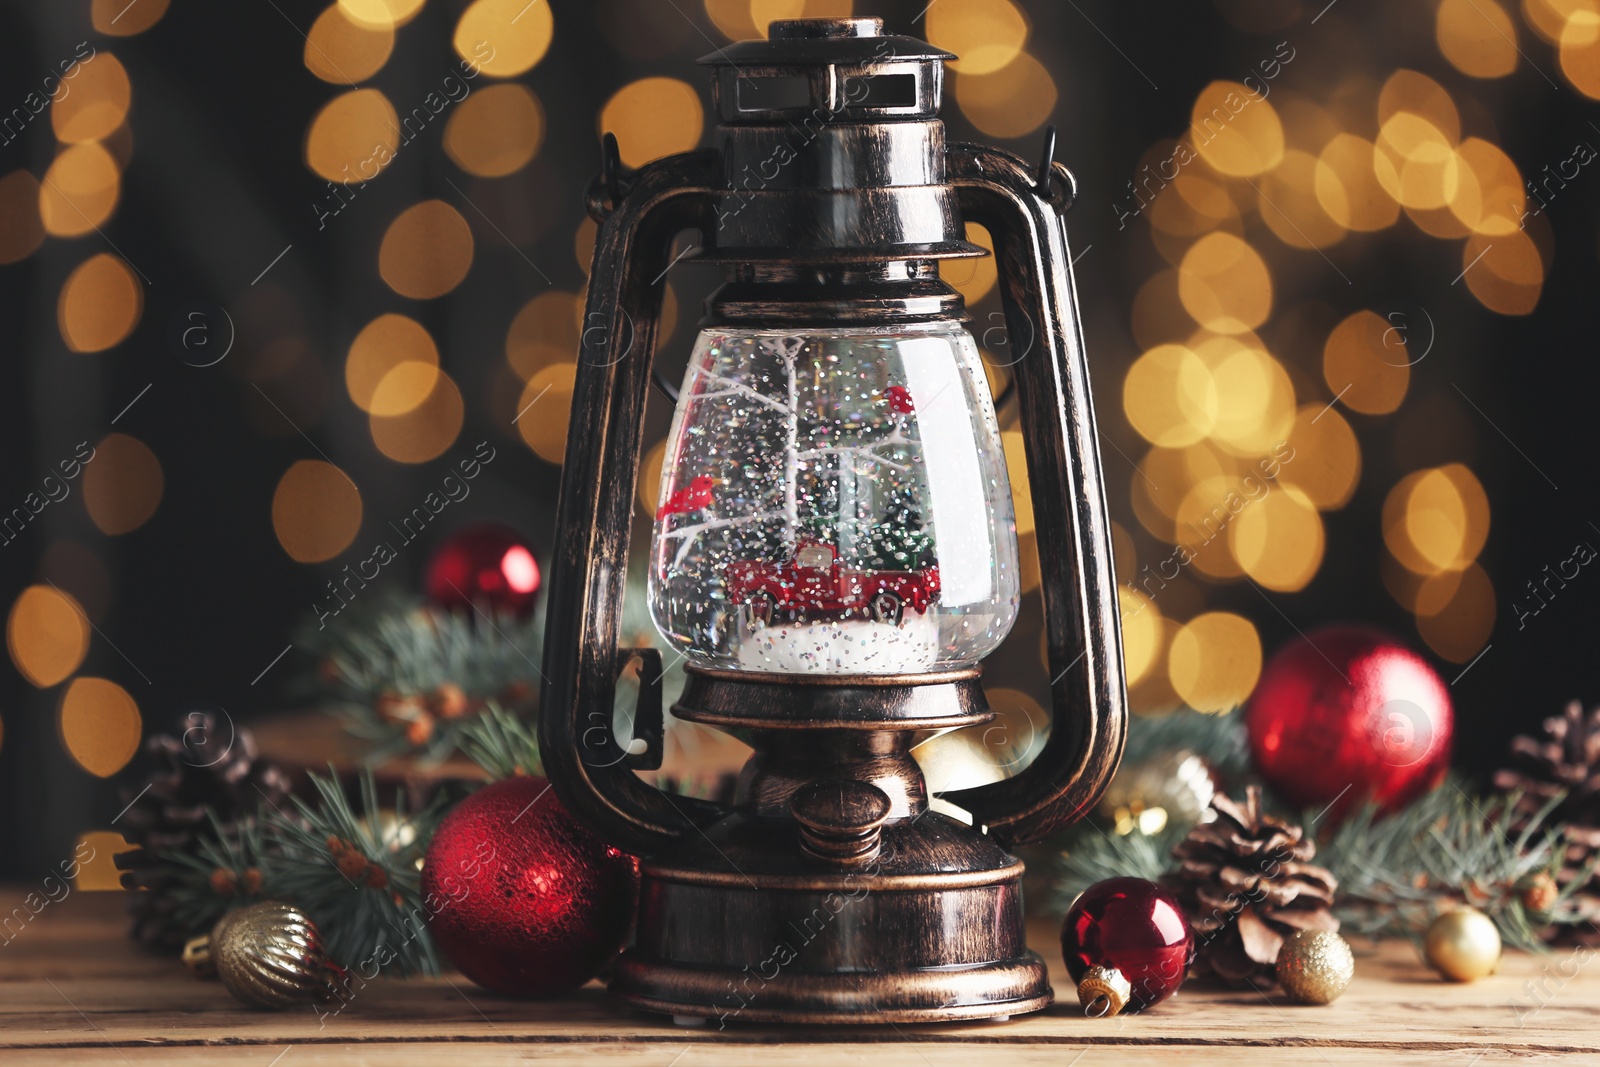 Photo of Beautiful snow globe in vintage lantern and Christmas decor on wooden table against blurred festive lights